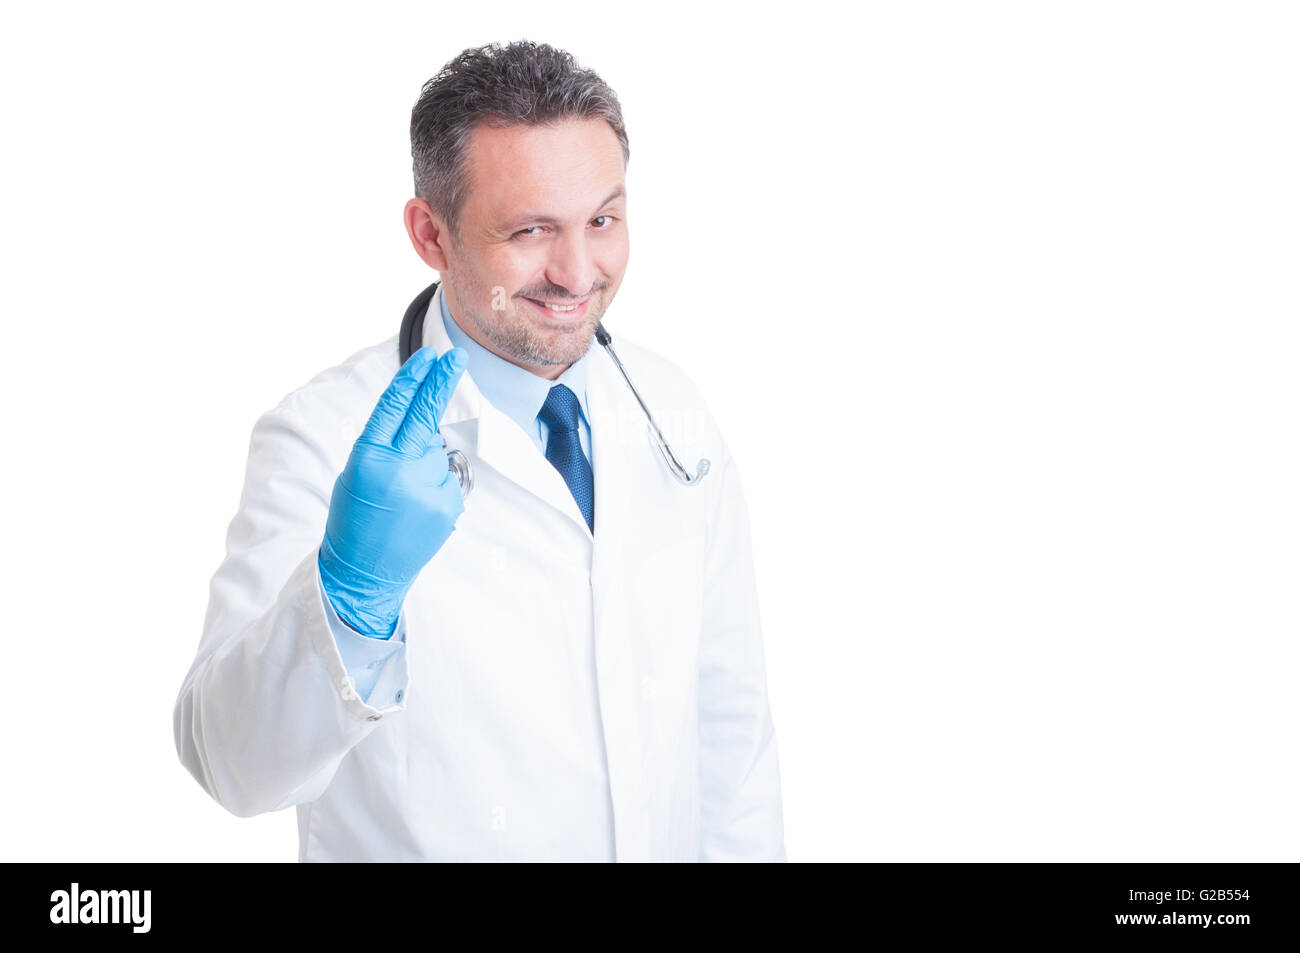 Proctologist showing two fingers with surgical latex gloves smiling isolated on white background Stock Photo